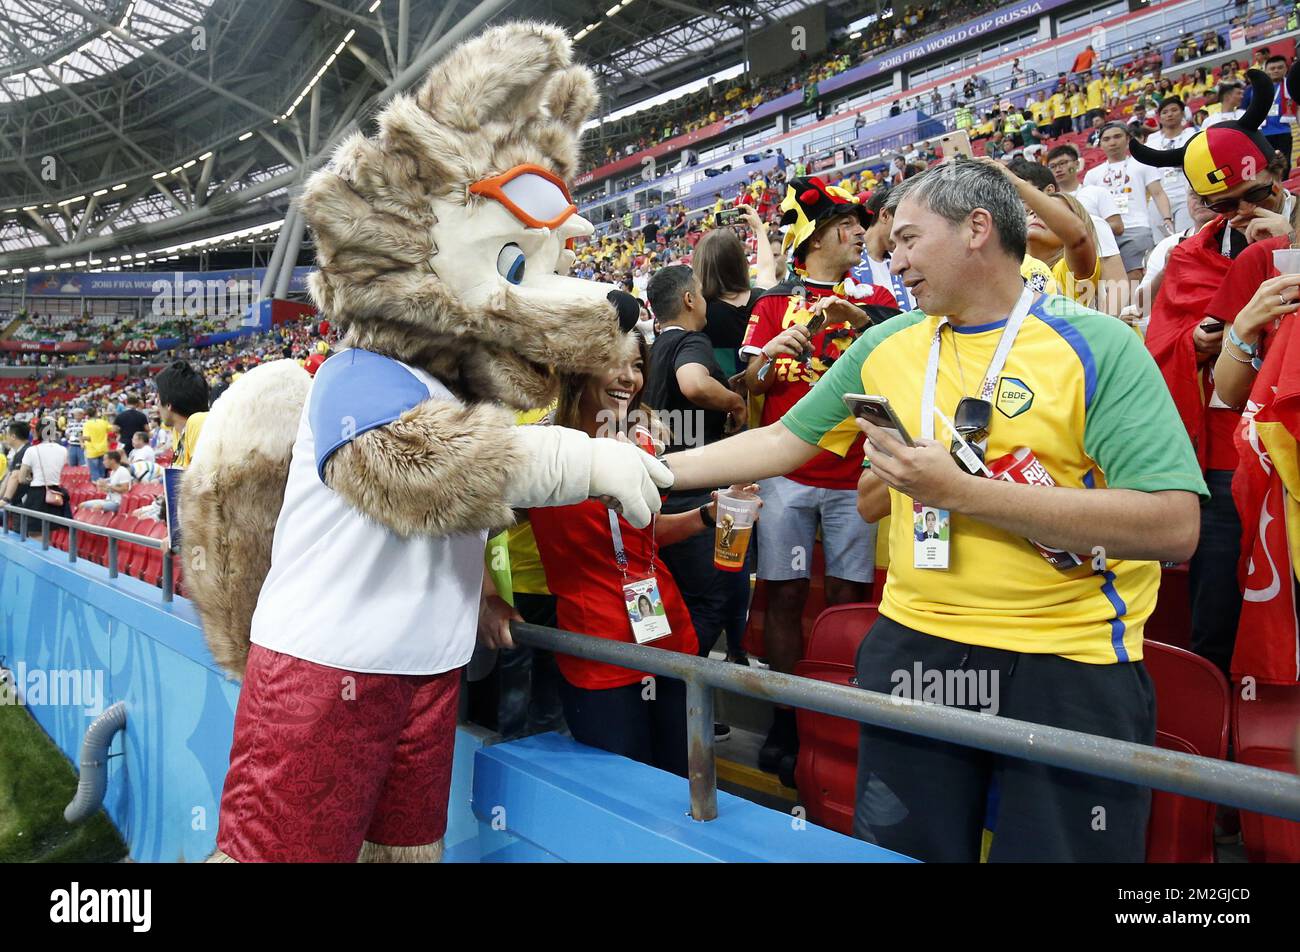 A World Cup fox mascot greets a Brazilian fan, ahead of a soccer game between Belgian national soccer team the Red Devils and Brazil in Kazan, Russia, Friday 06 July 2018, the quarter-finals of the 2018 FIFA World Cup. BELGA PHOTO BRUNO FAHY  Stock Photo